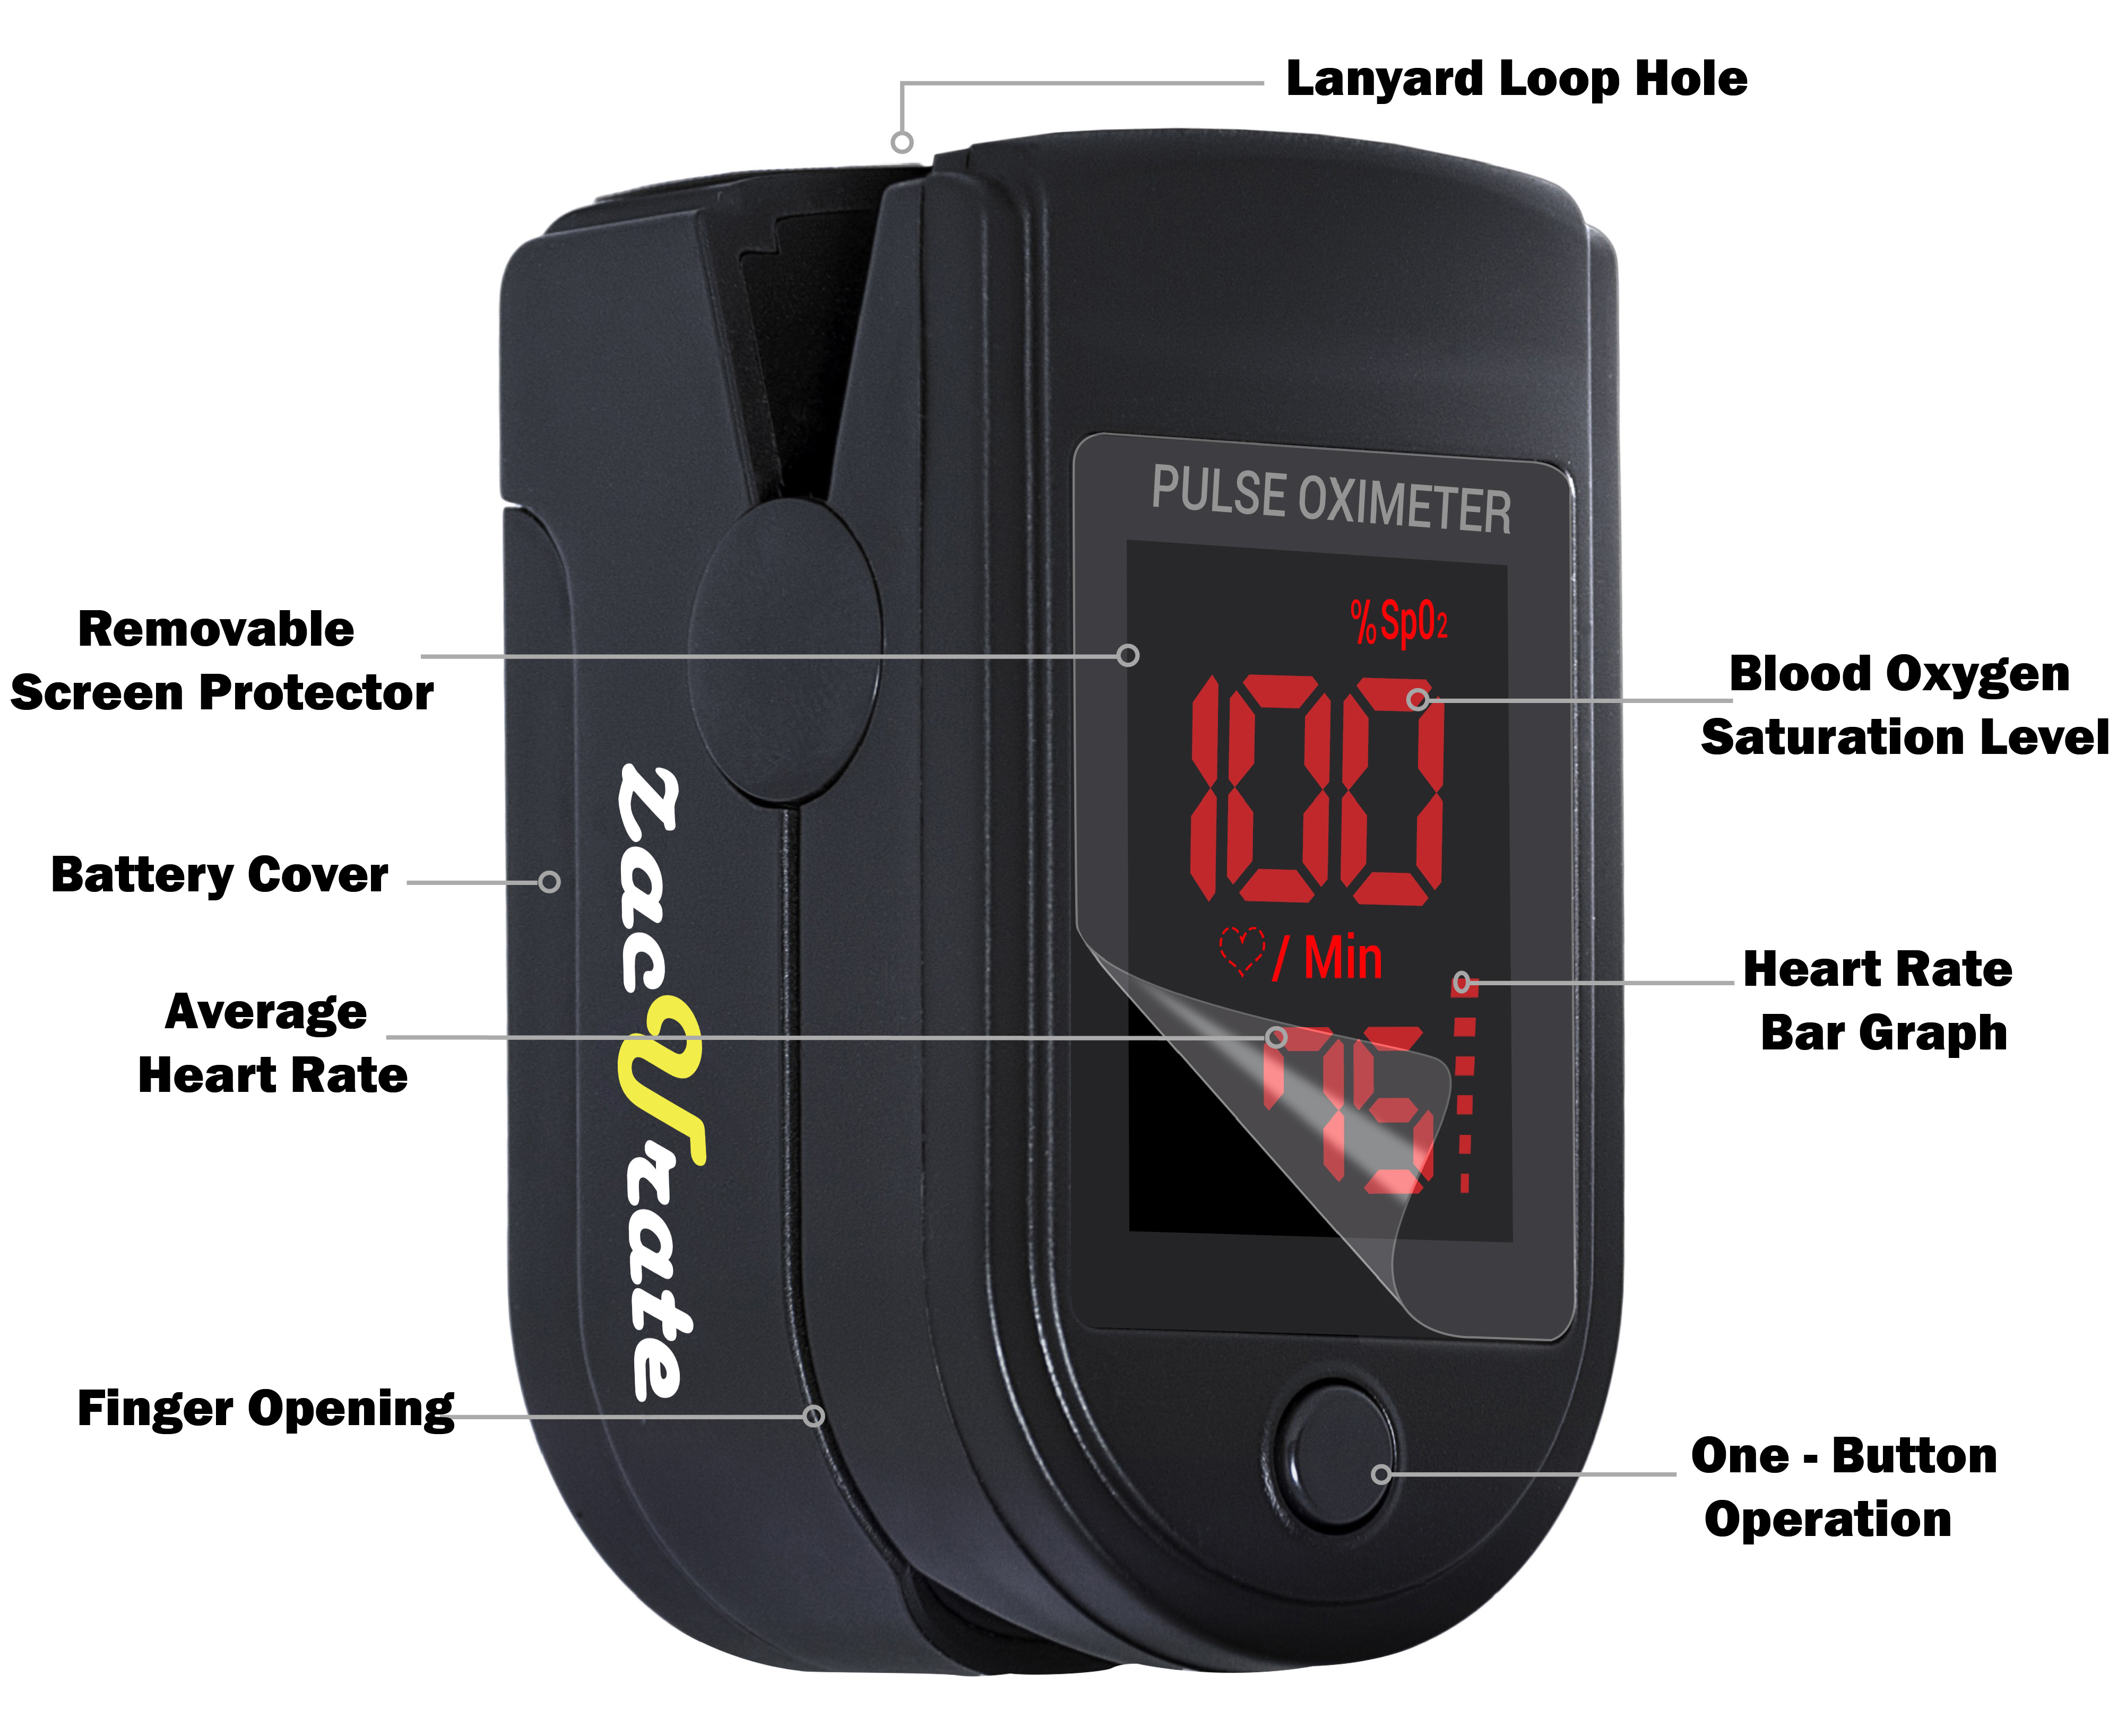 Zacurate Pro Series 500DL Sporting and Aviation Fingertip Pulse Oximeter Blood Oxygen Saturation Monitor (Royal Black) - image 2 of 7